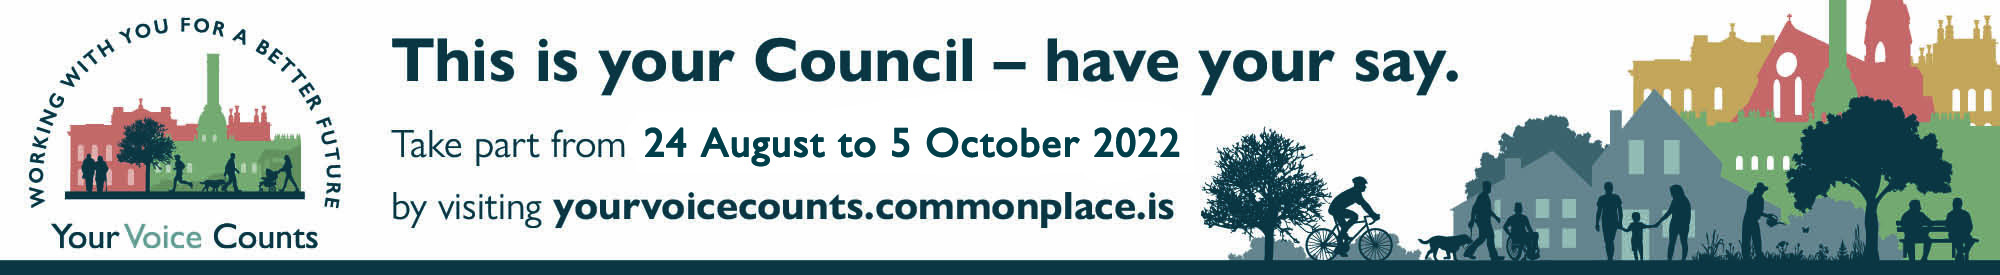 This is your Council - have your say